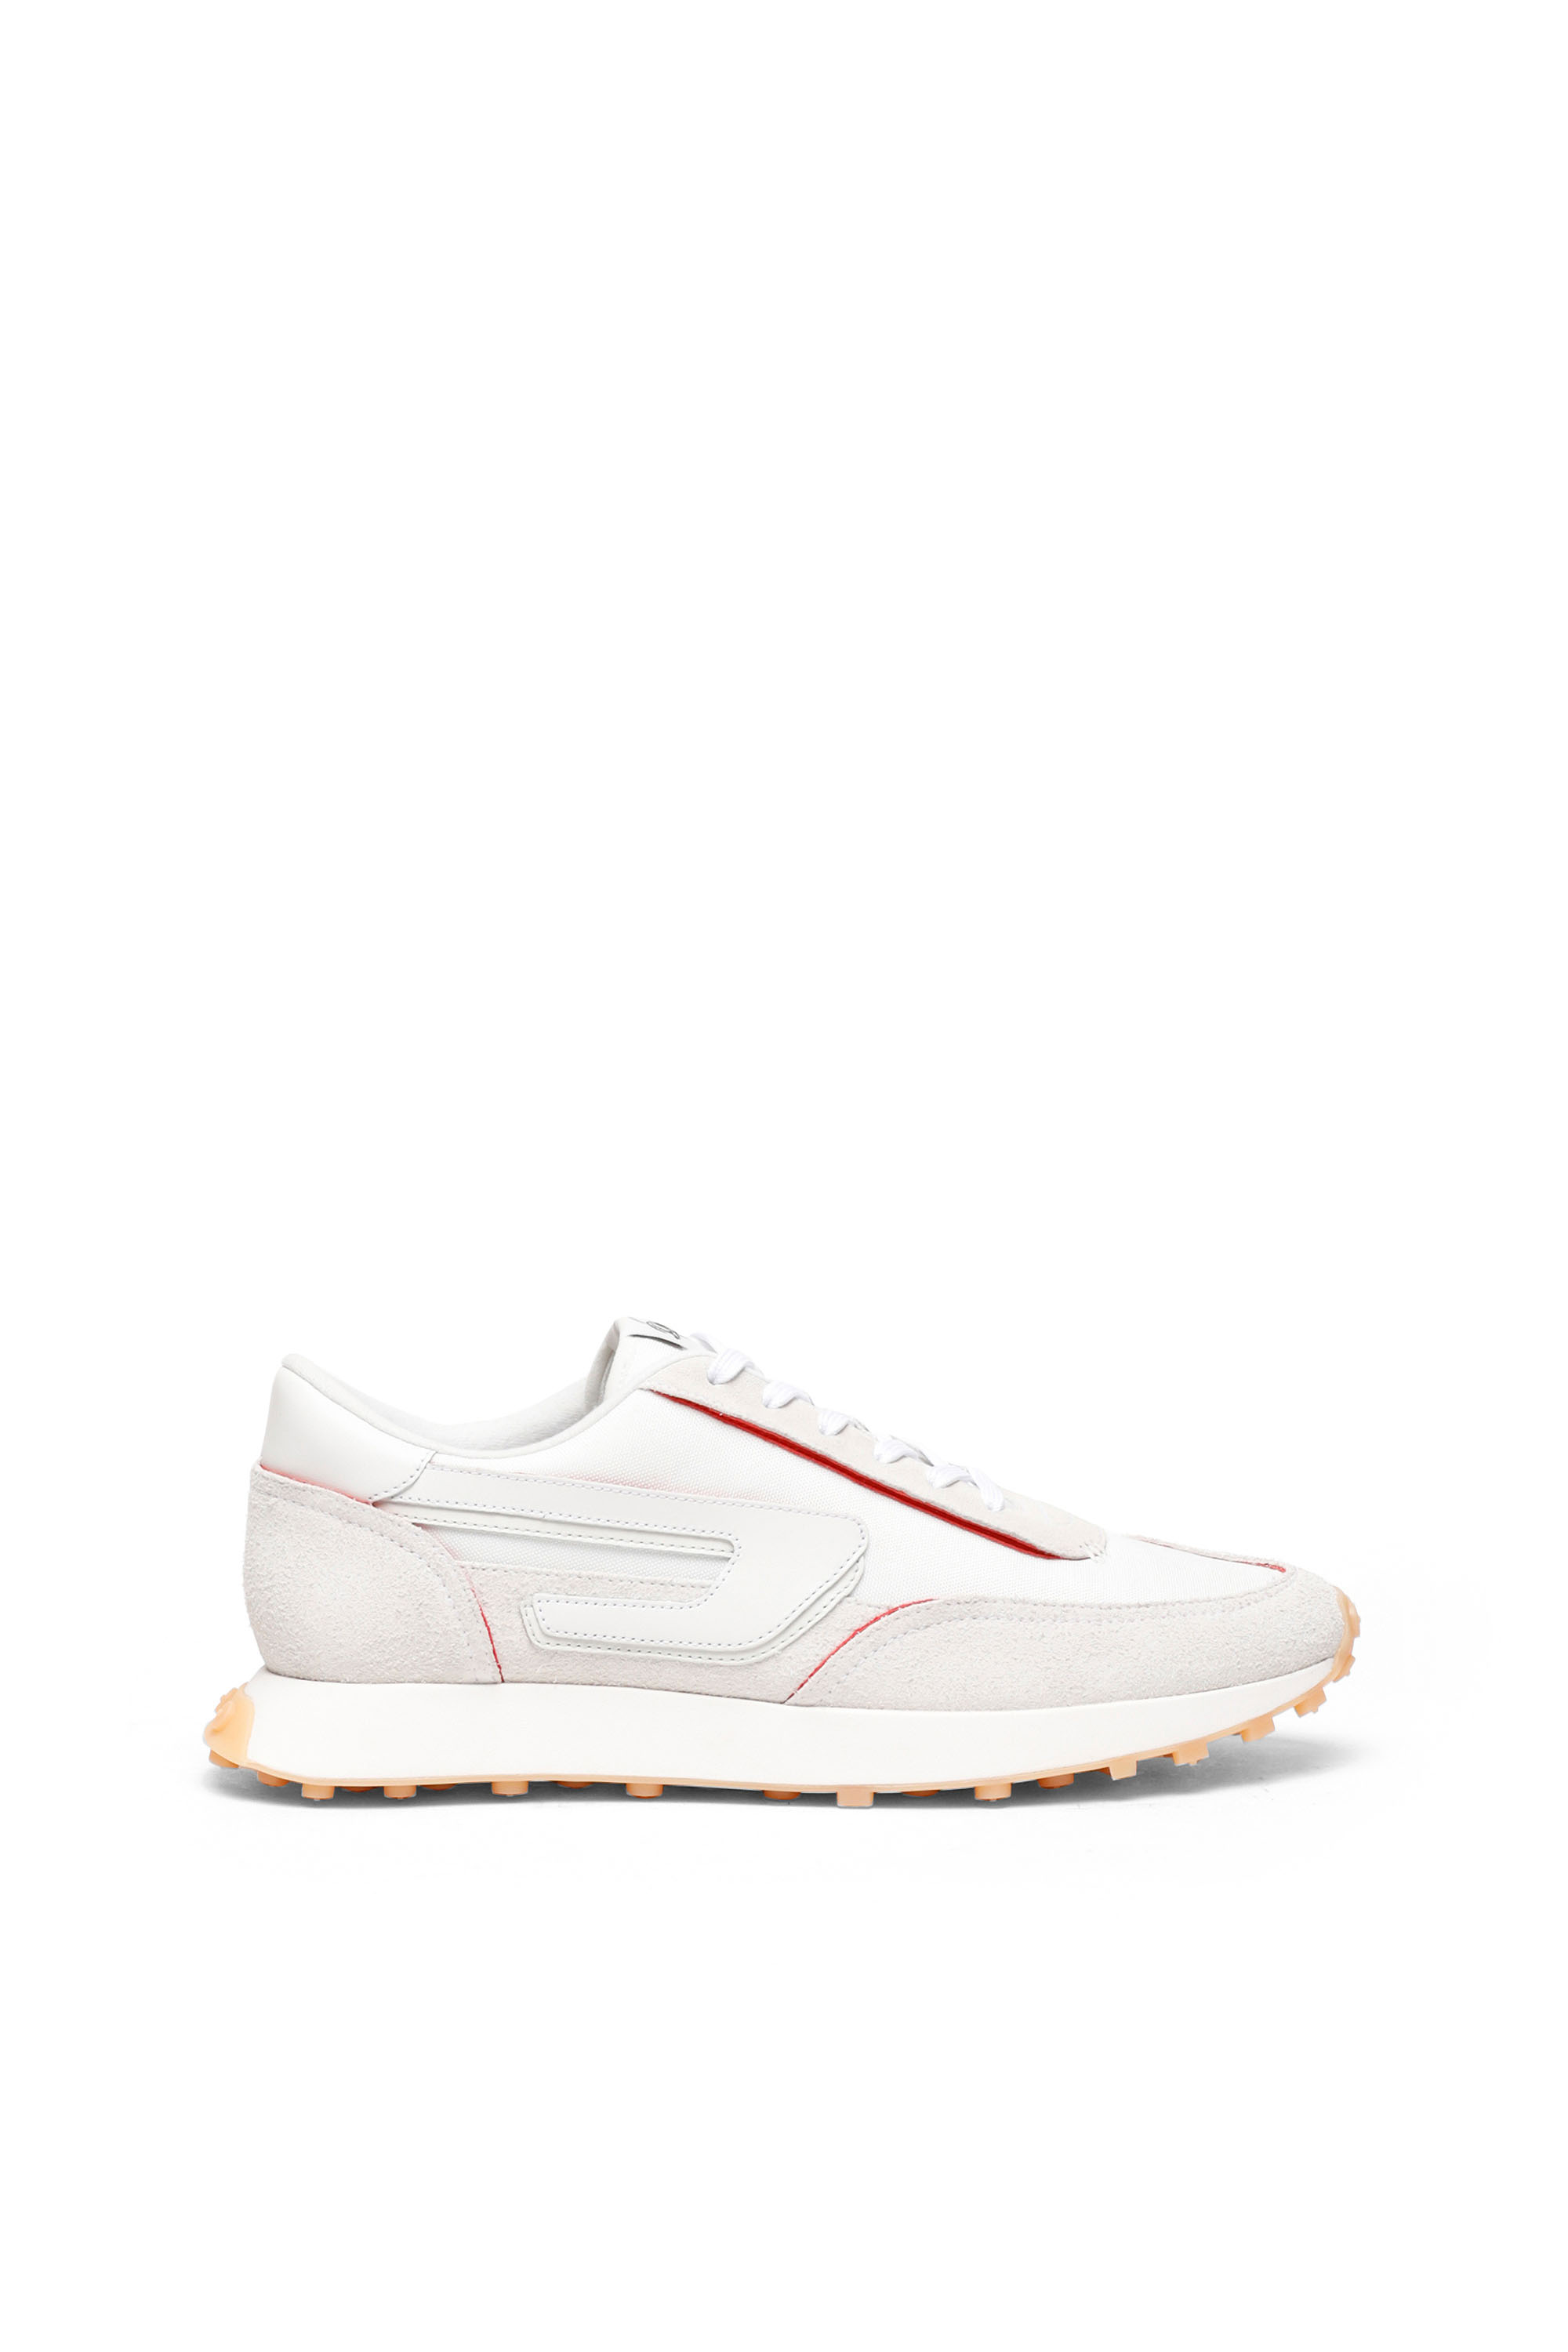 S-RACER LC, Weiss/Rot - Sneakers